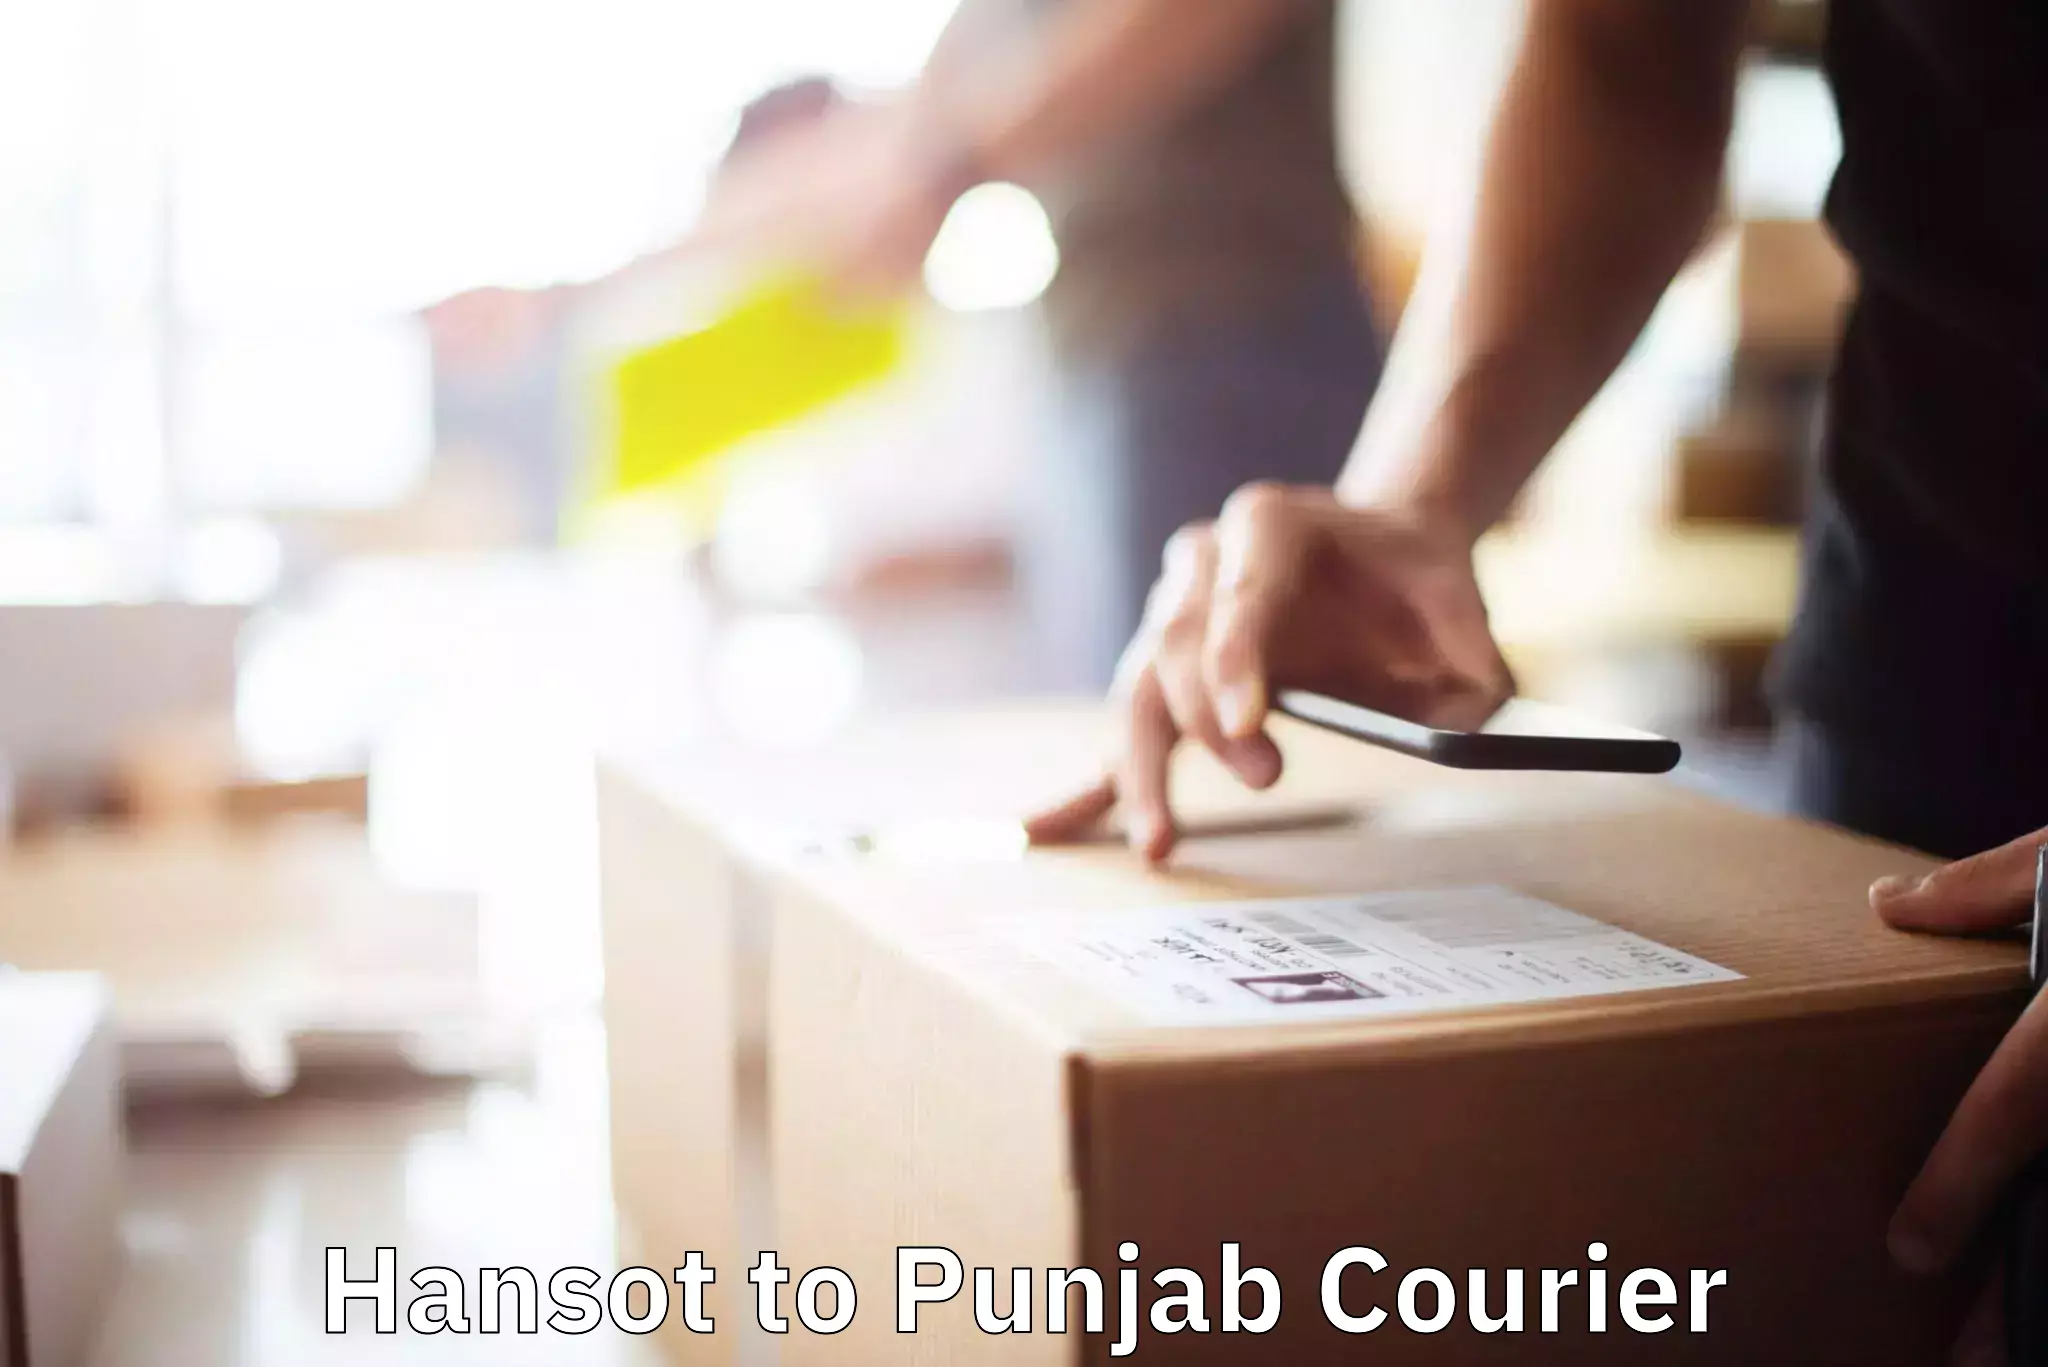 Home relocation experts Hansot to Punjab